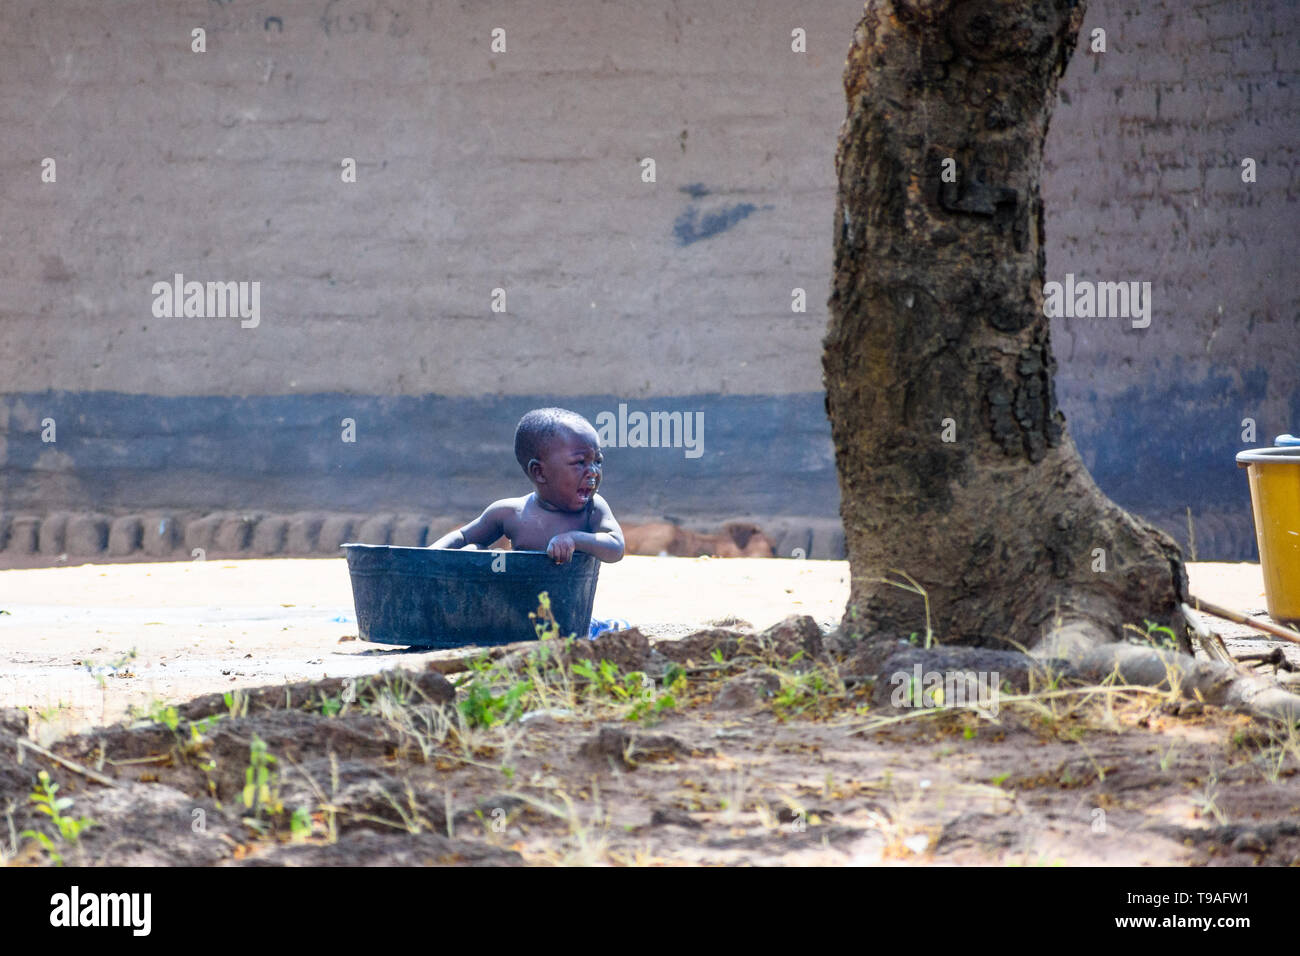 Malawian baby sitting in a plastic bowl is crying for attention Stock Photo